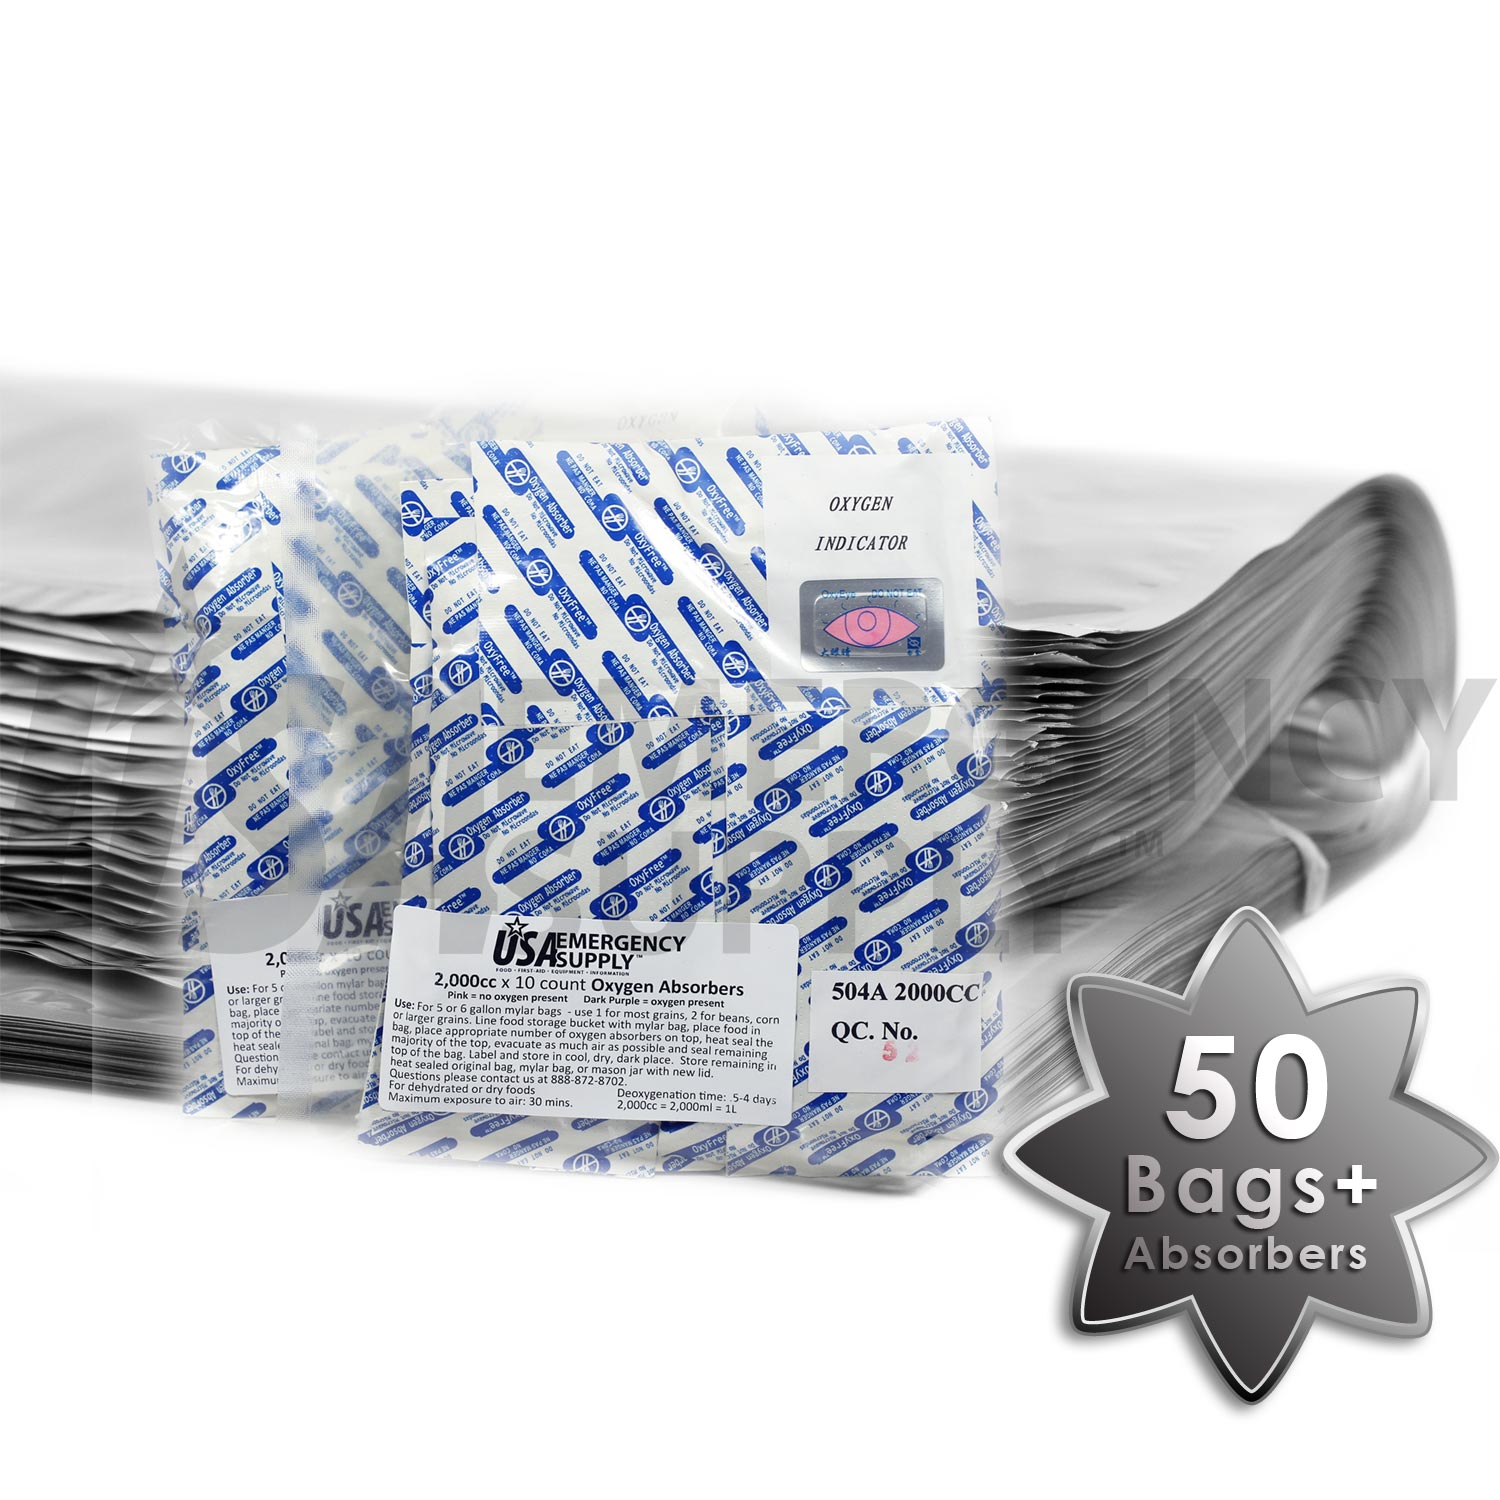 https://www.usaemergencysupply.com/media/img/products/lg/50-count-5-gallon-mylar-bags-with-ziplock-and-oxygen-absorbers-a-lg.jpg